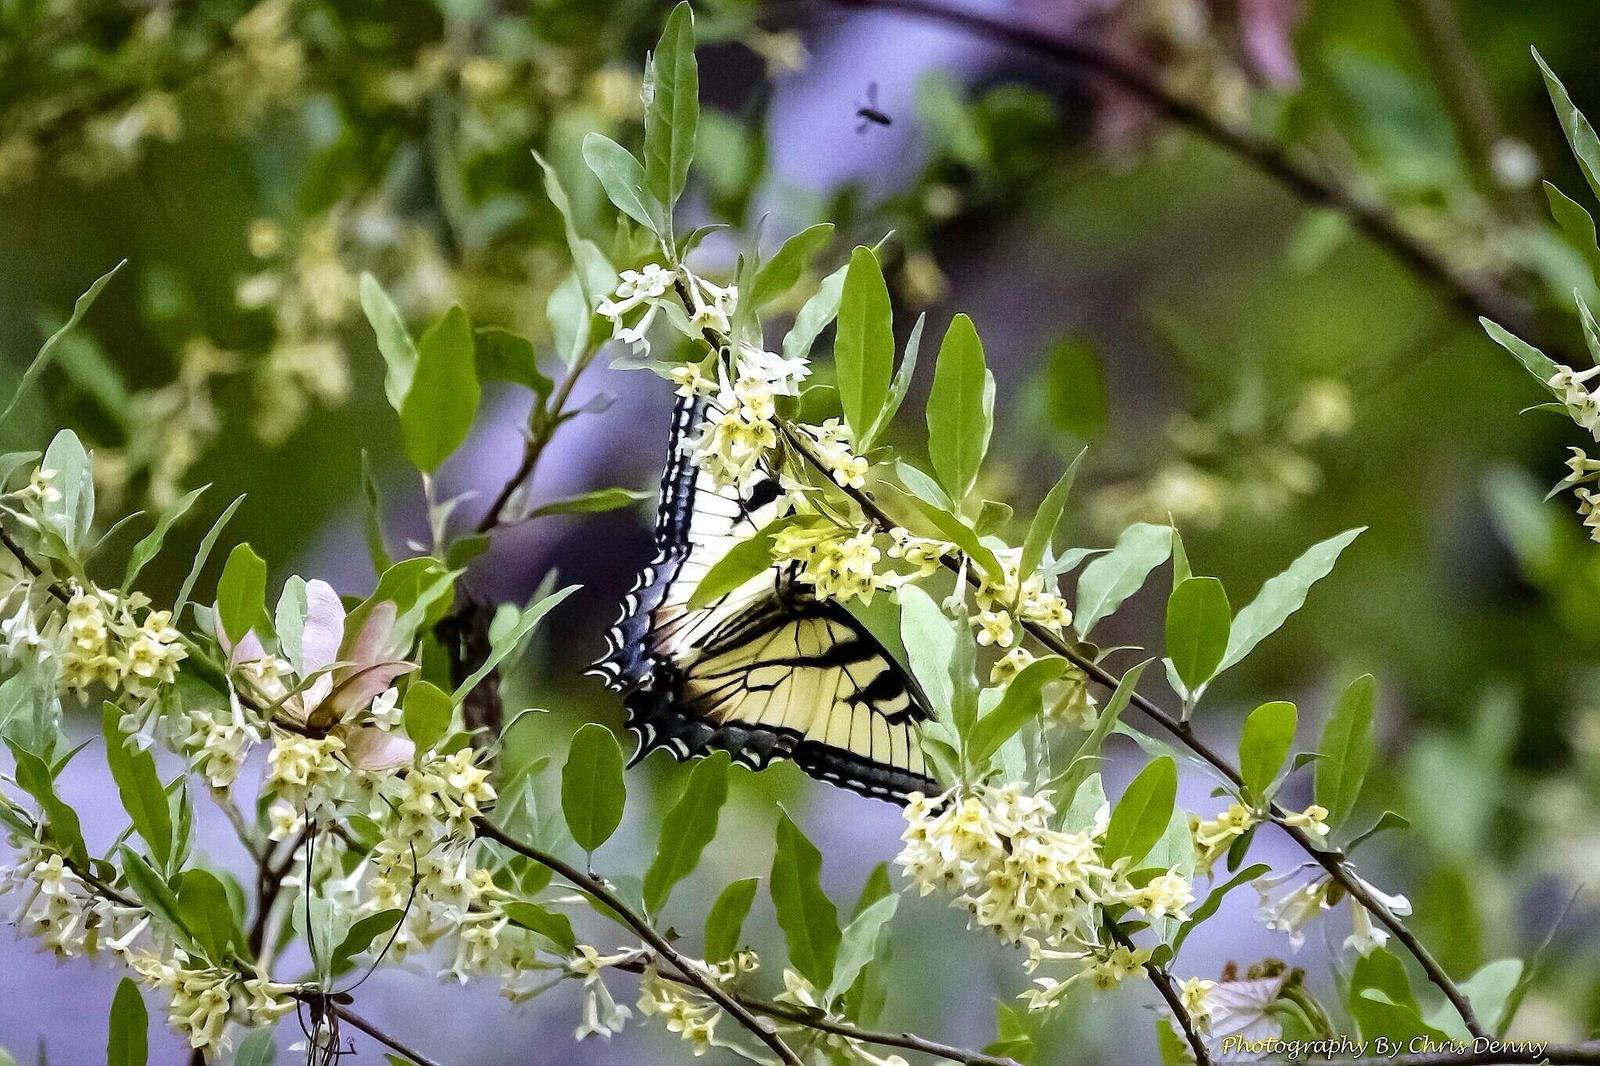 Eastern Tiger Swallowtail Photo by Chris Denny